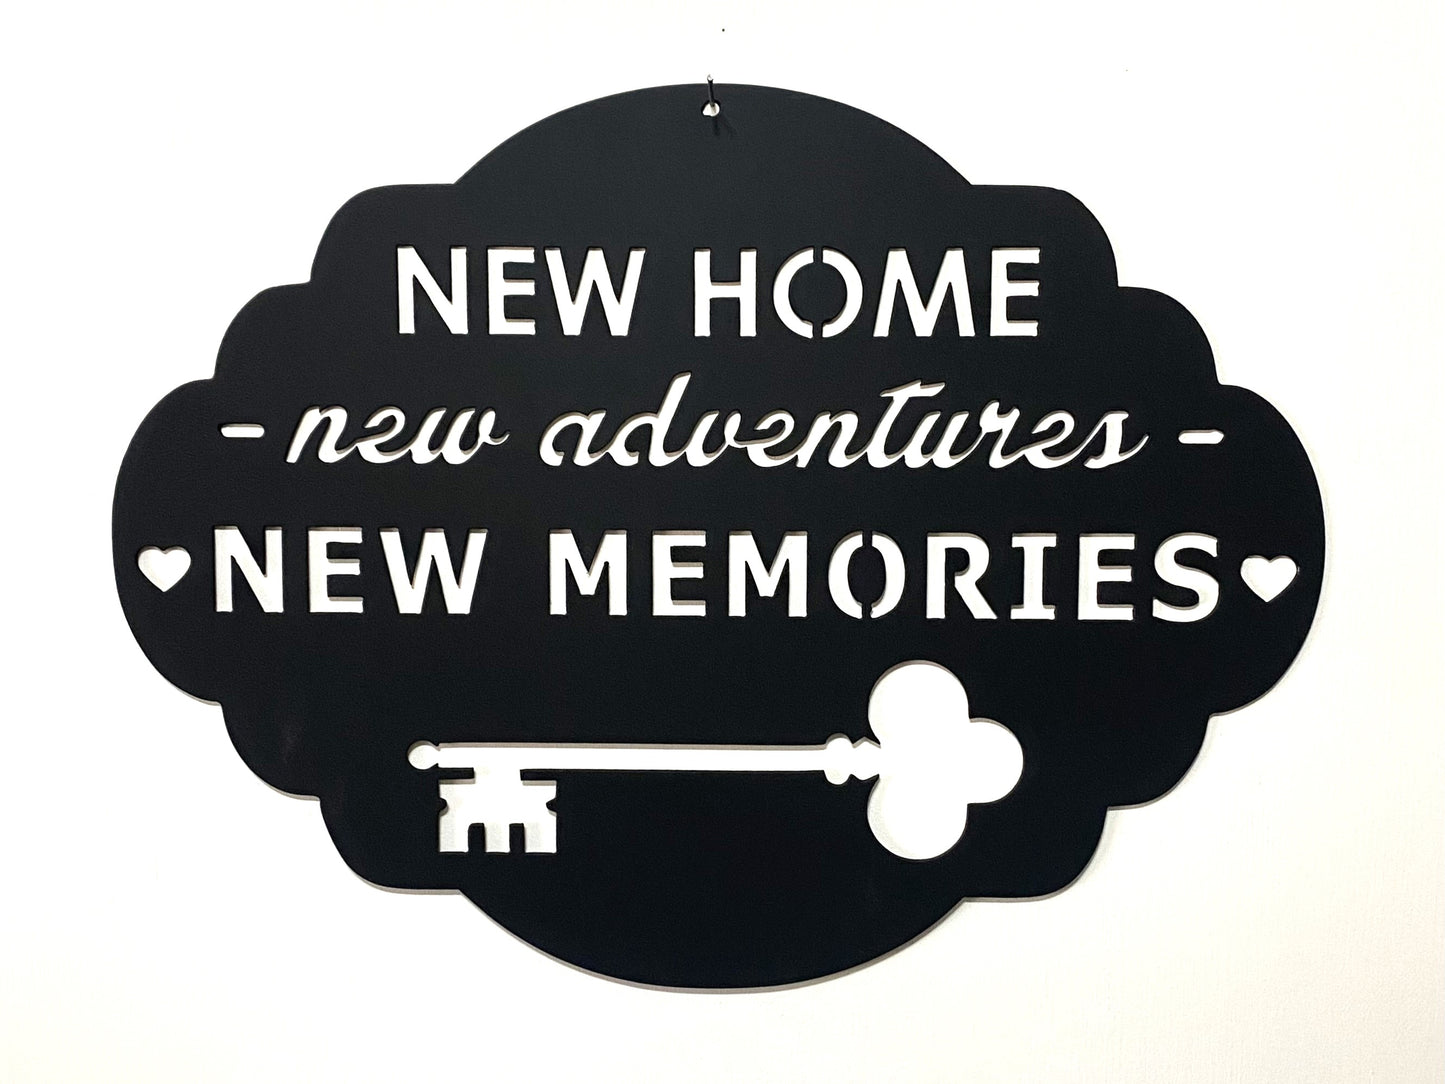 New Home New Adventures New Memories, Home Decor, Wall Art, Metal Decoration, New Home Owners